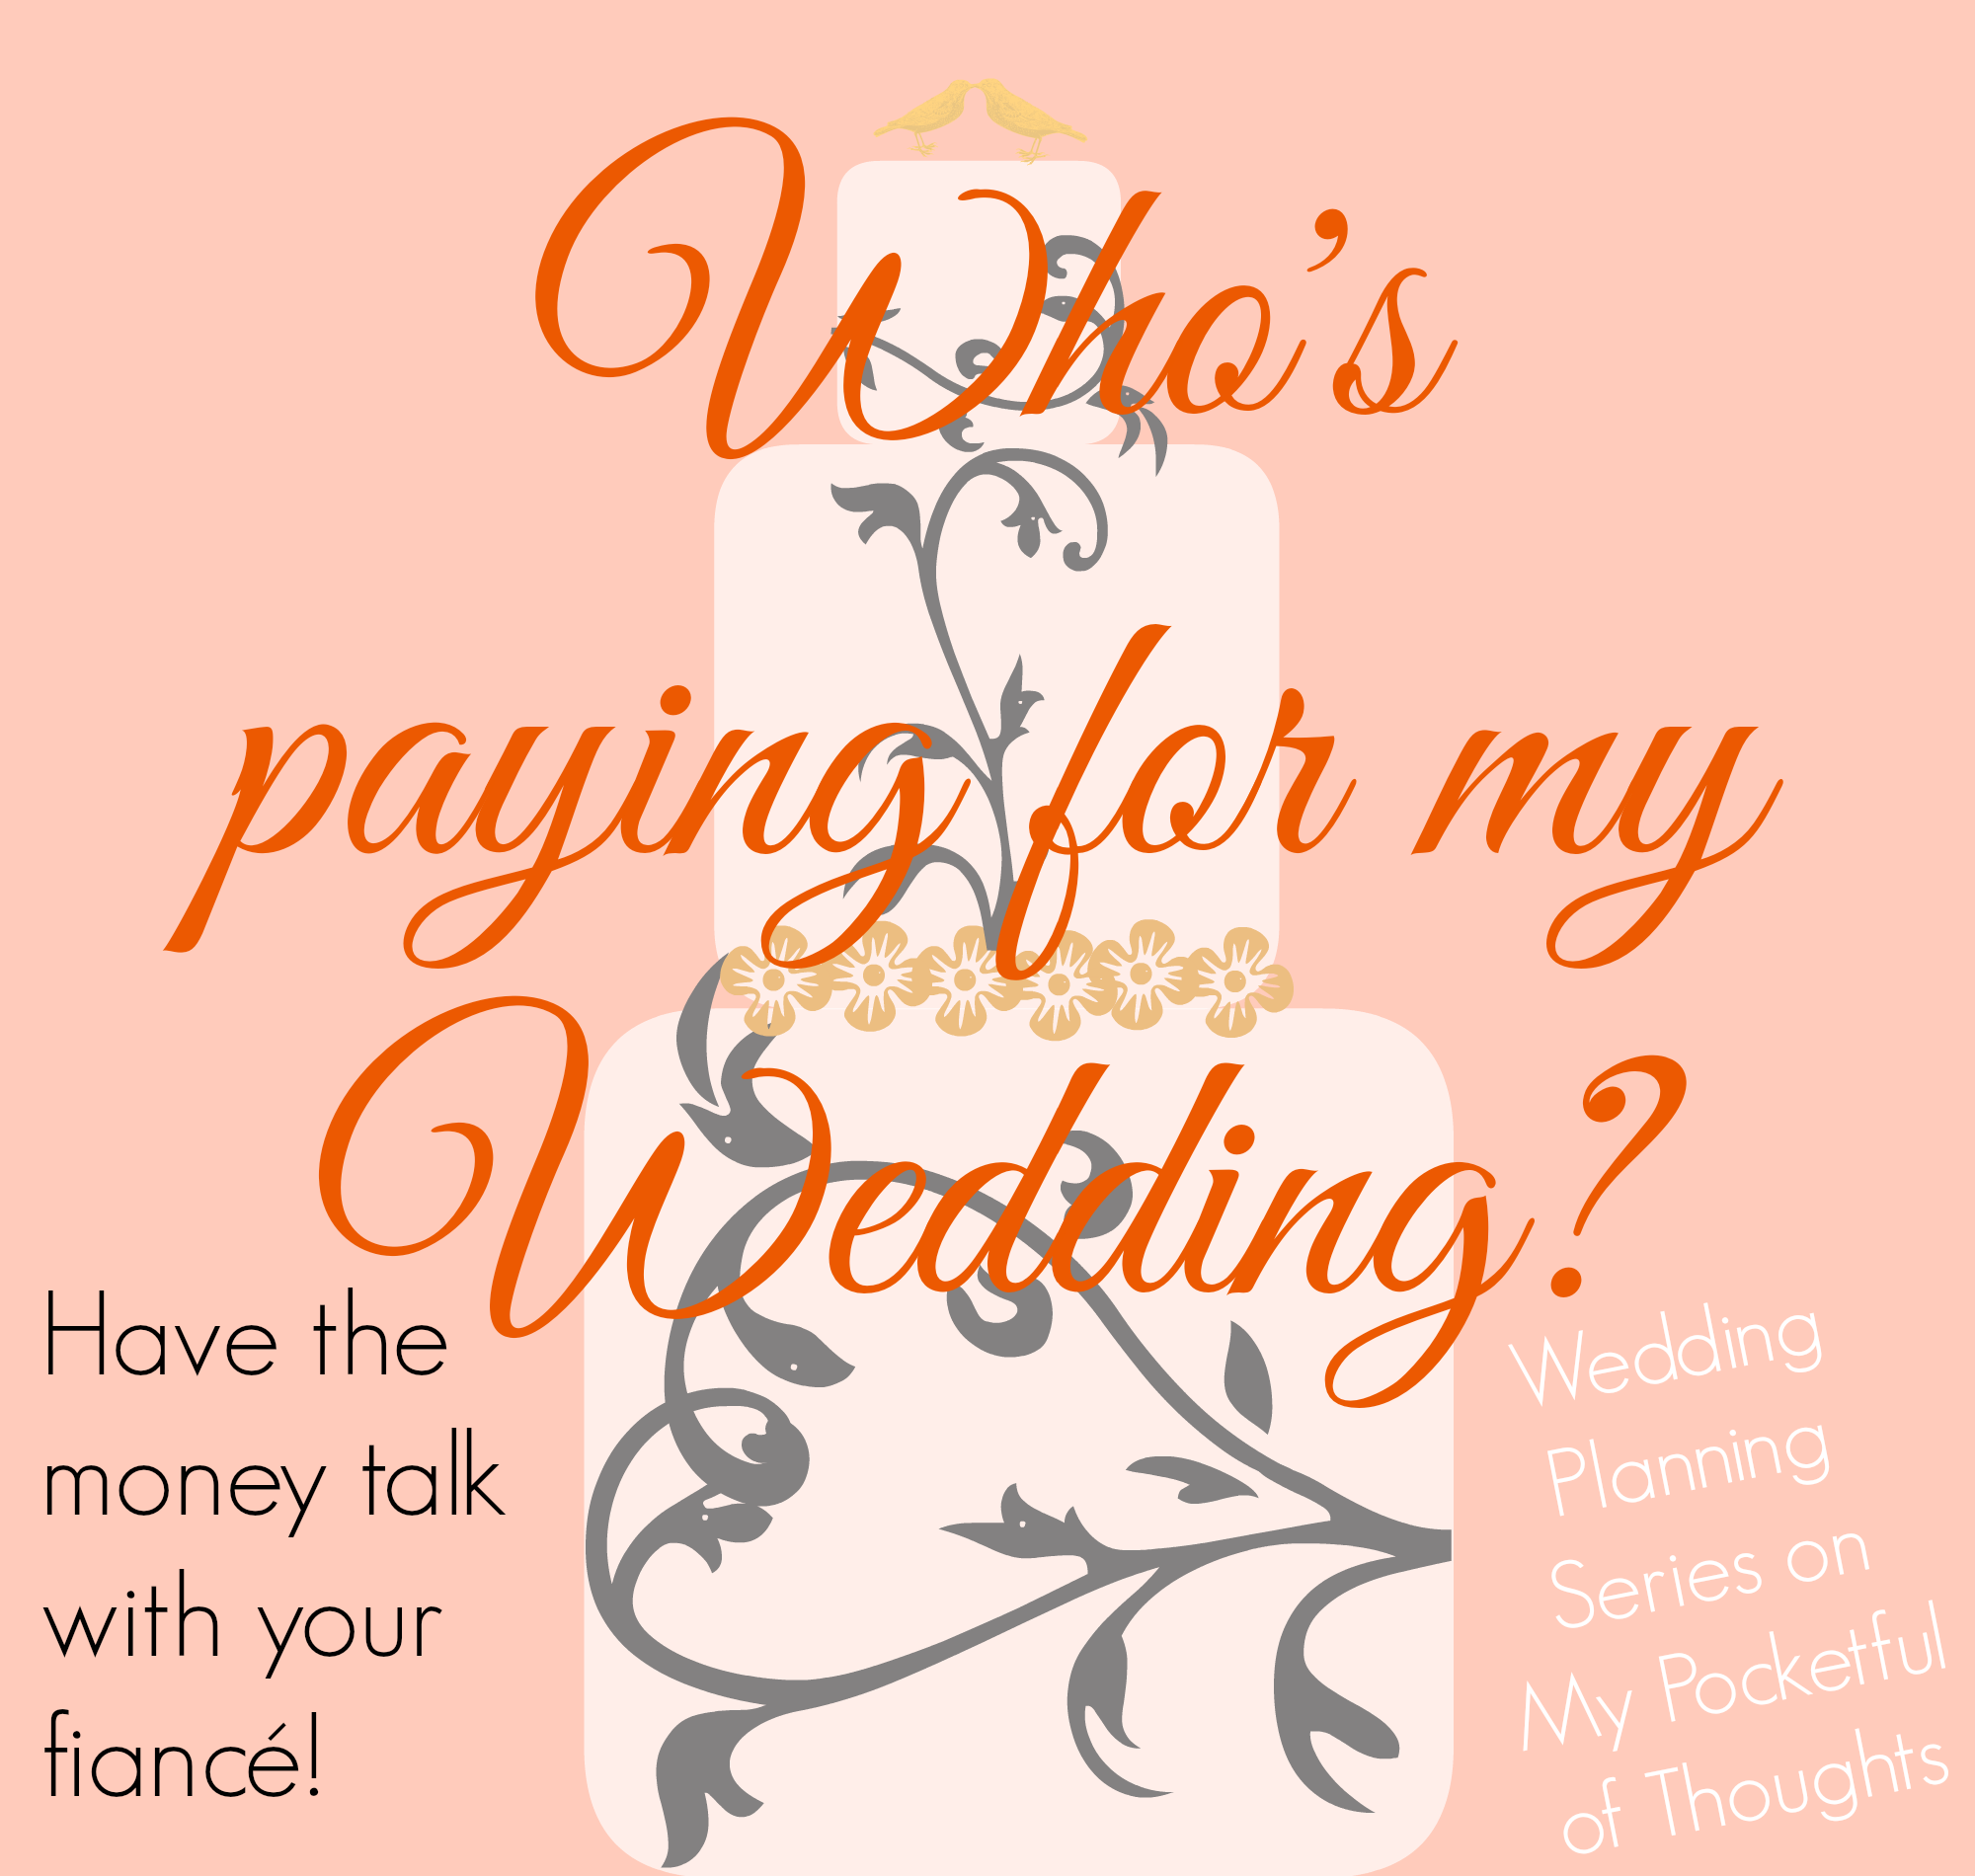 Are you wondering who is paying for the wedding? Then you need to have this discussion! This article is part of the #Wedding Planning Series on My Pocketful of Thoughts